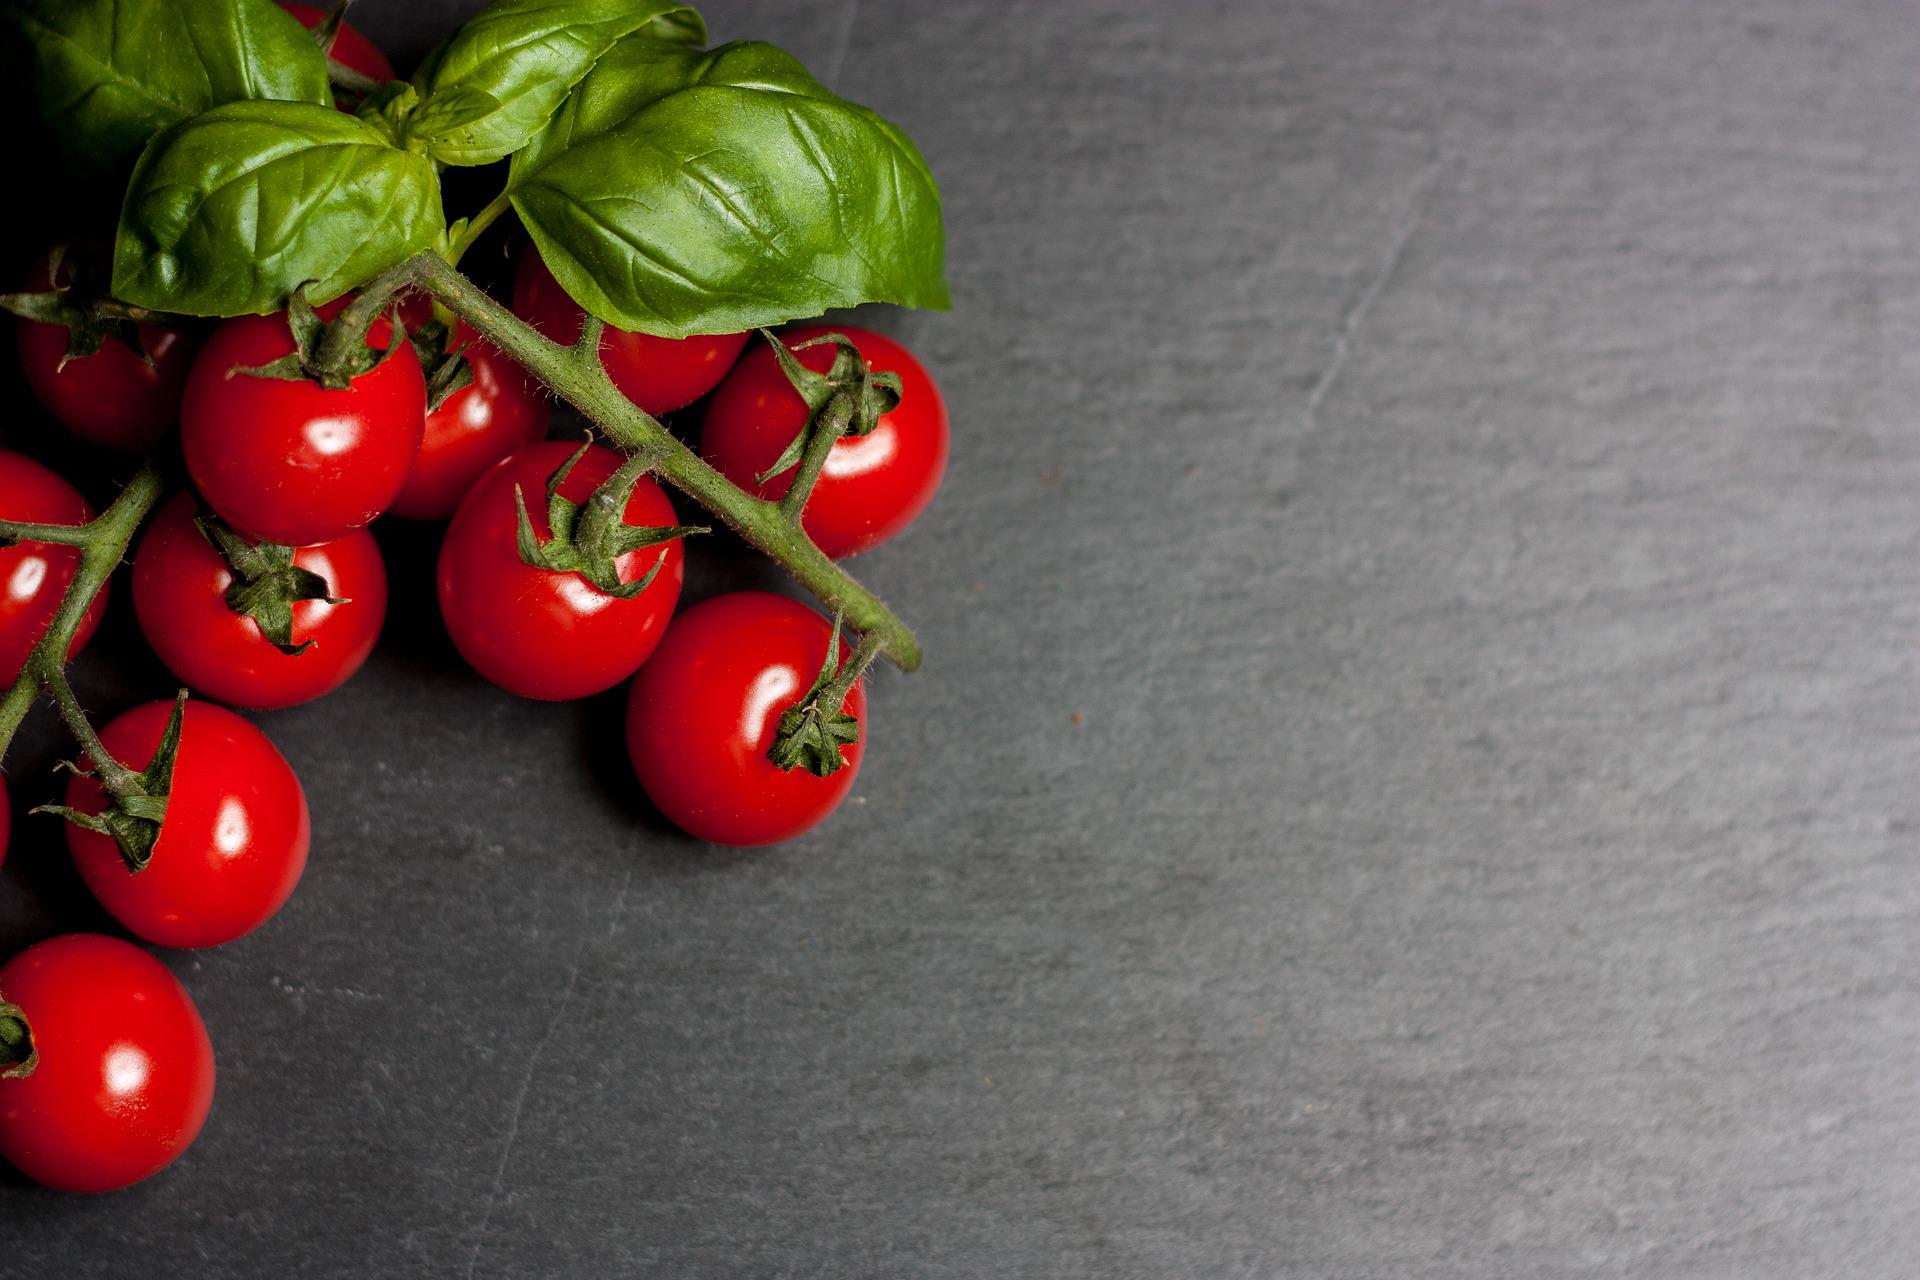 10 Outstanding Benefits and Side Effects Of Cherry Tomatoes